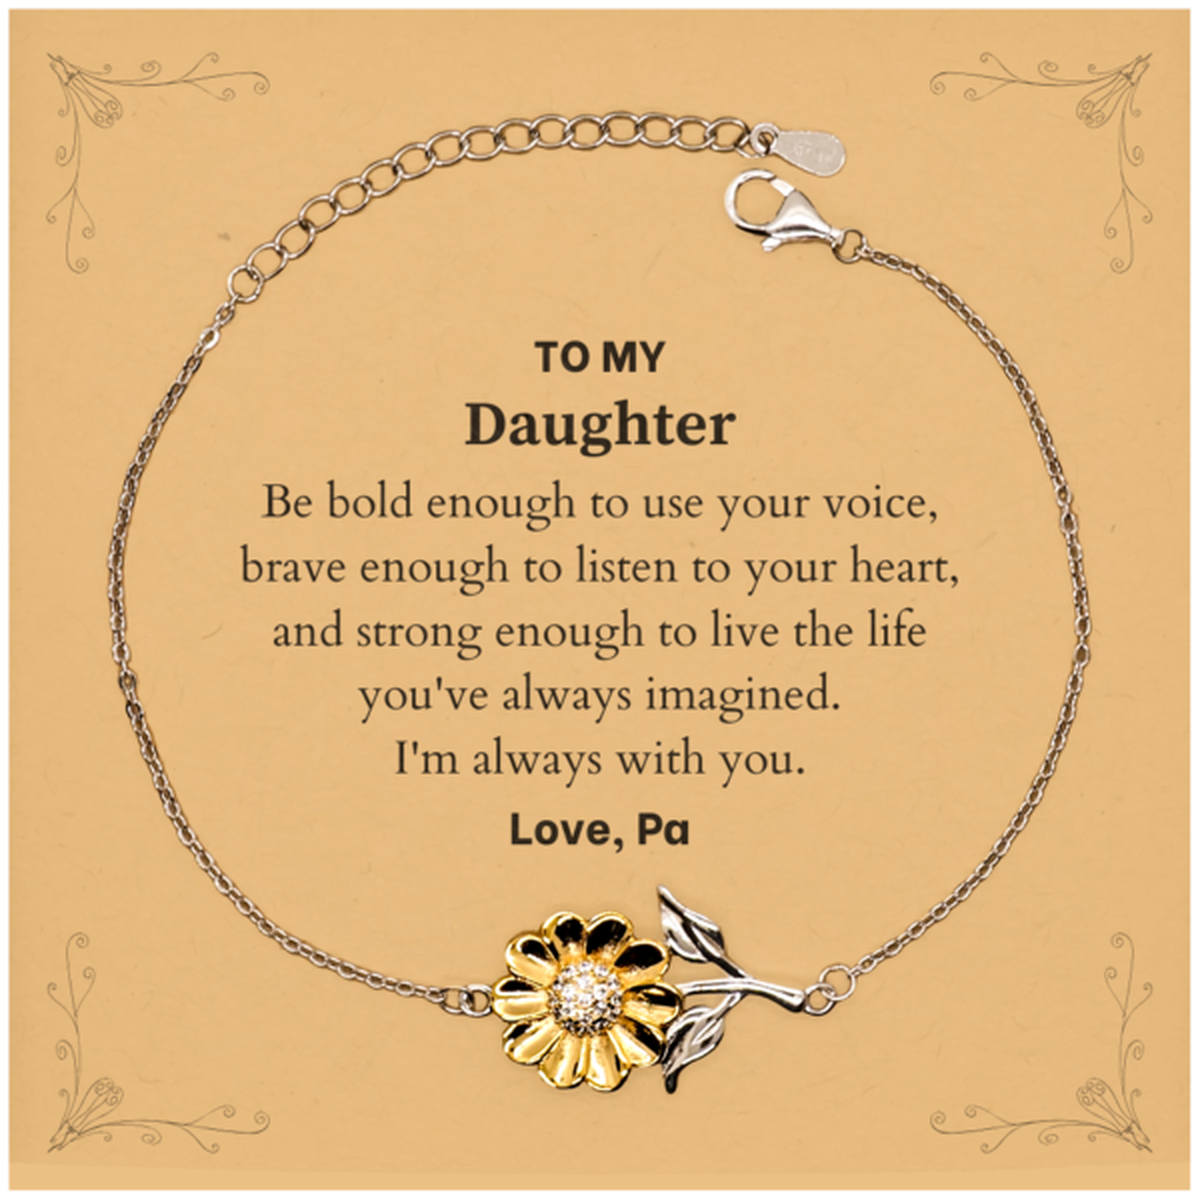 Keepsake Daughter Sunflower Bracelet Gift Idea Graduation Christmas Birthday Daughter from Pa, Daughter Be bold enough to use your voice, brave enough to listen to your heart. Love, Pa